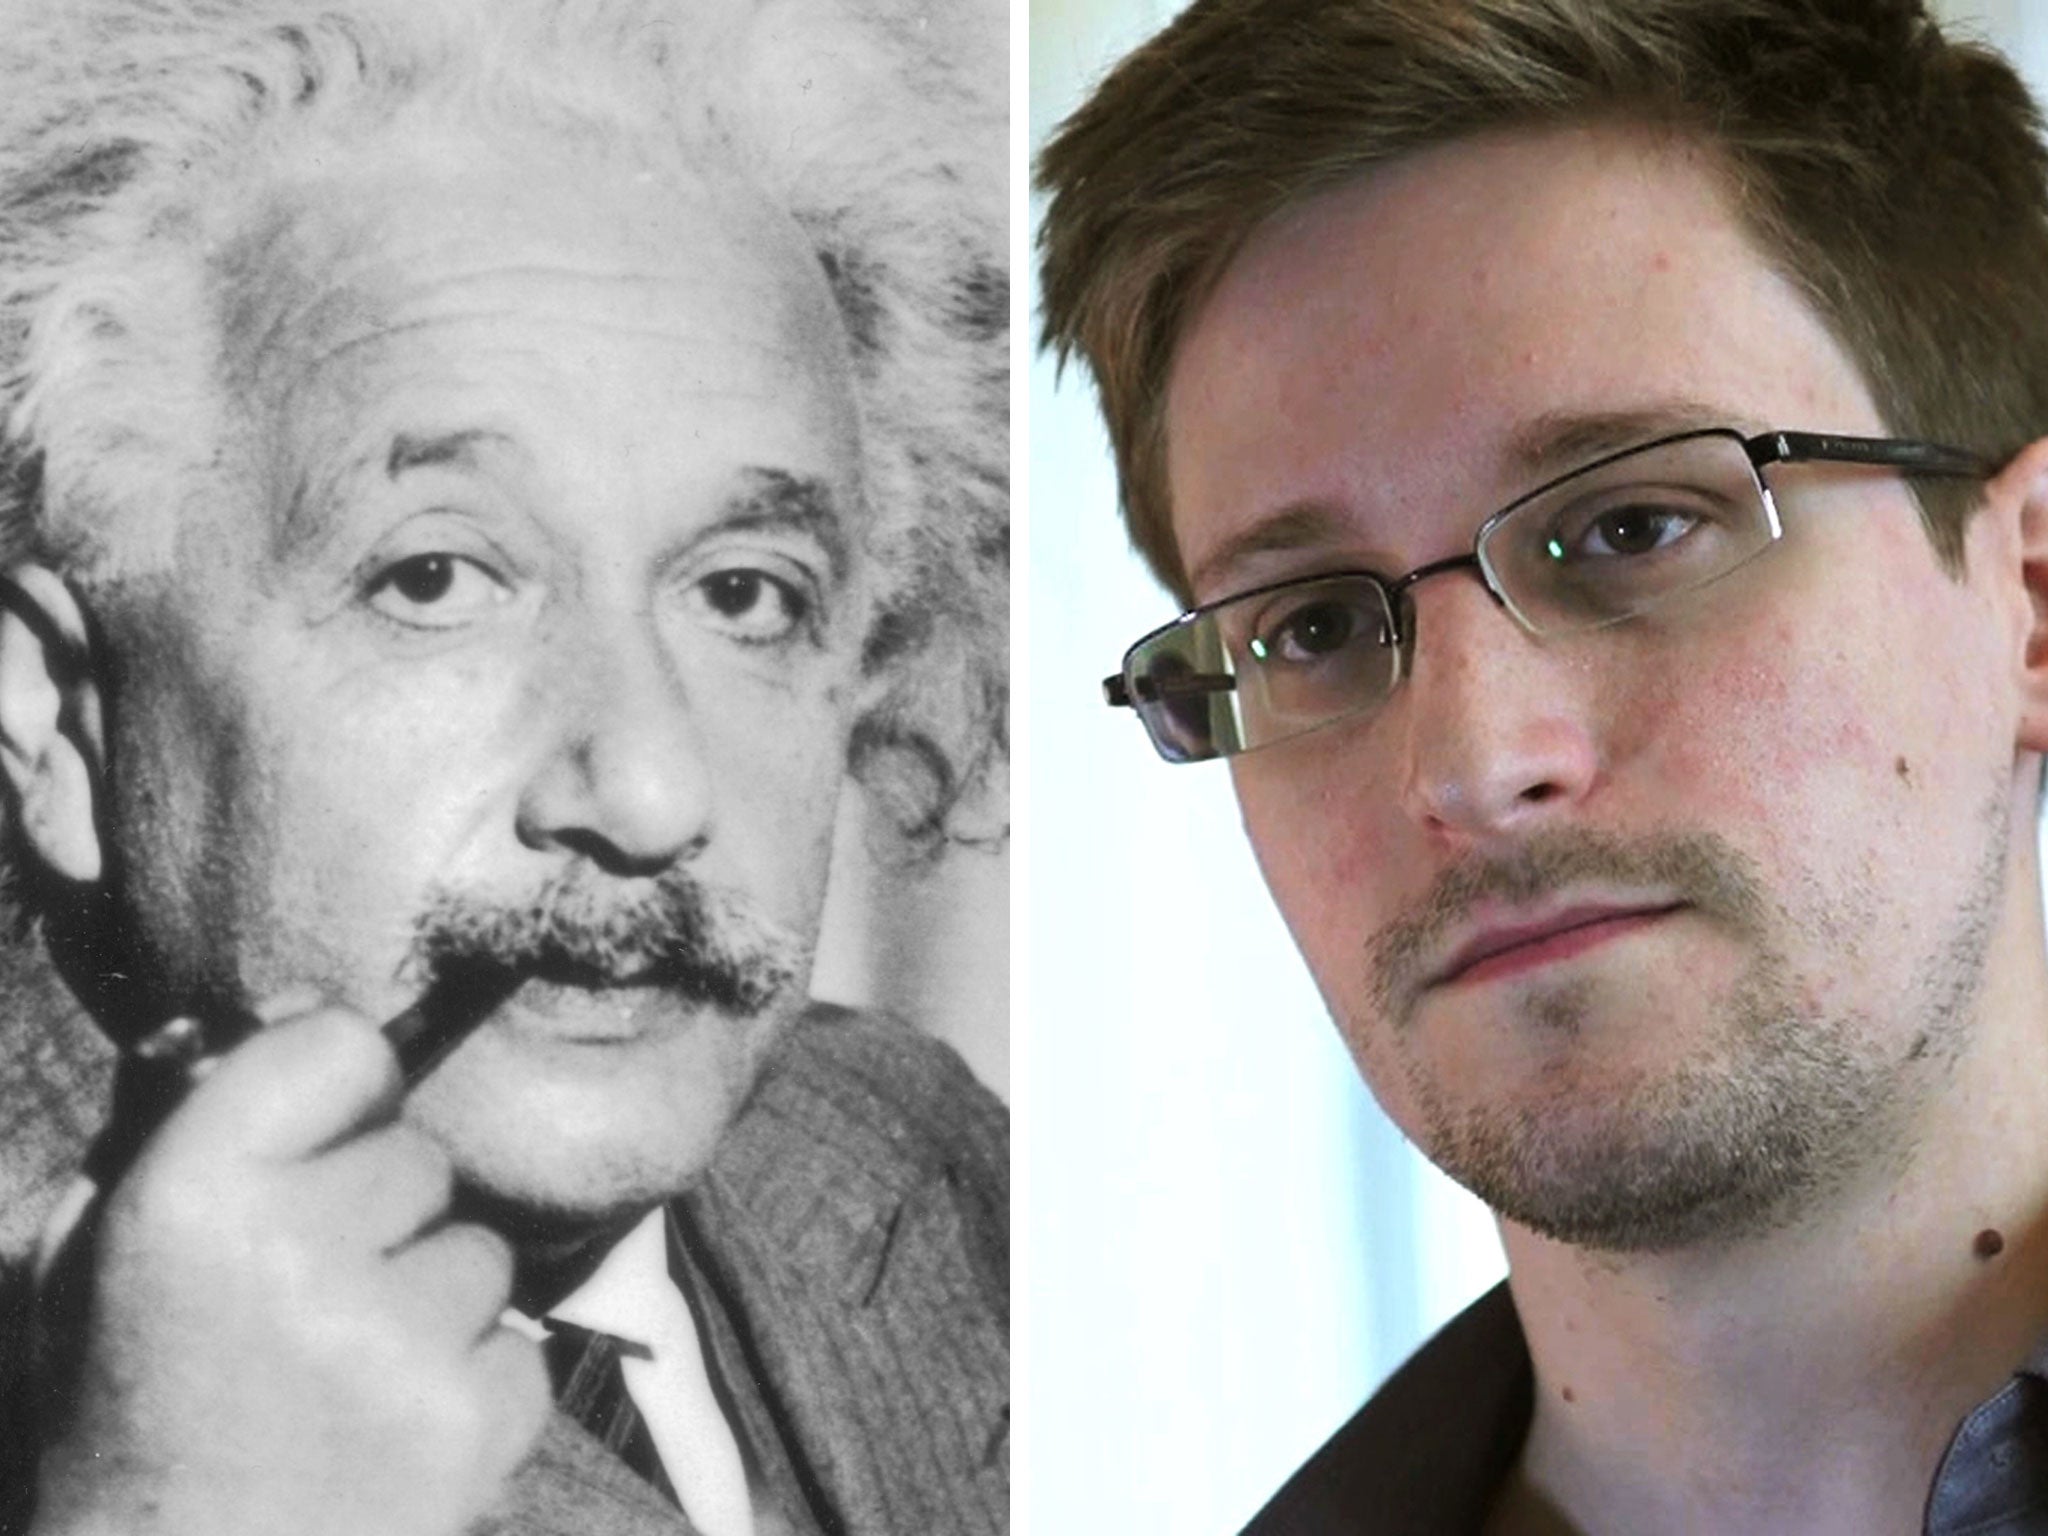 Refugees: Angela Merkel should offer Edward Snowden a safe harbour, just as the US sheltered Einstein from the Nazis